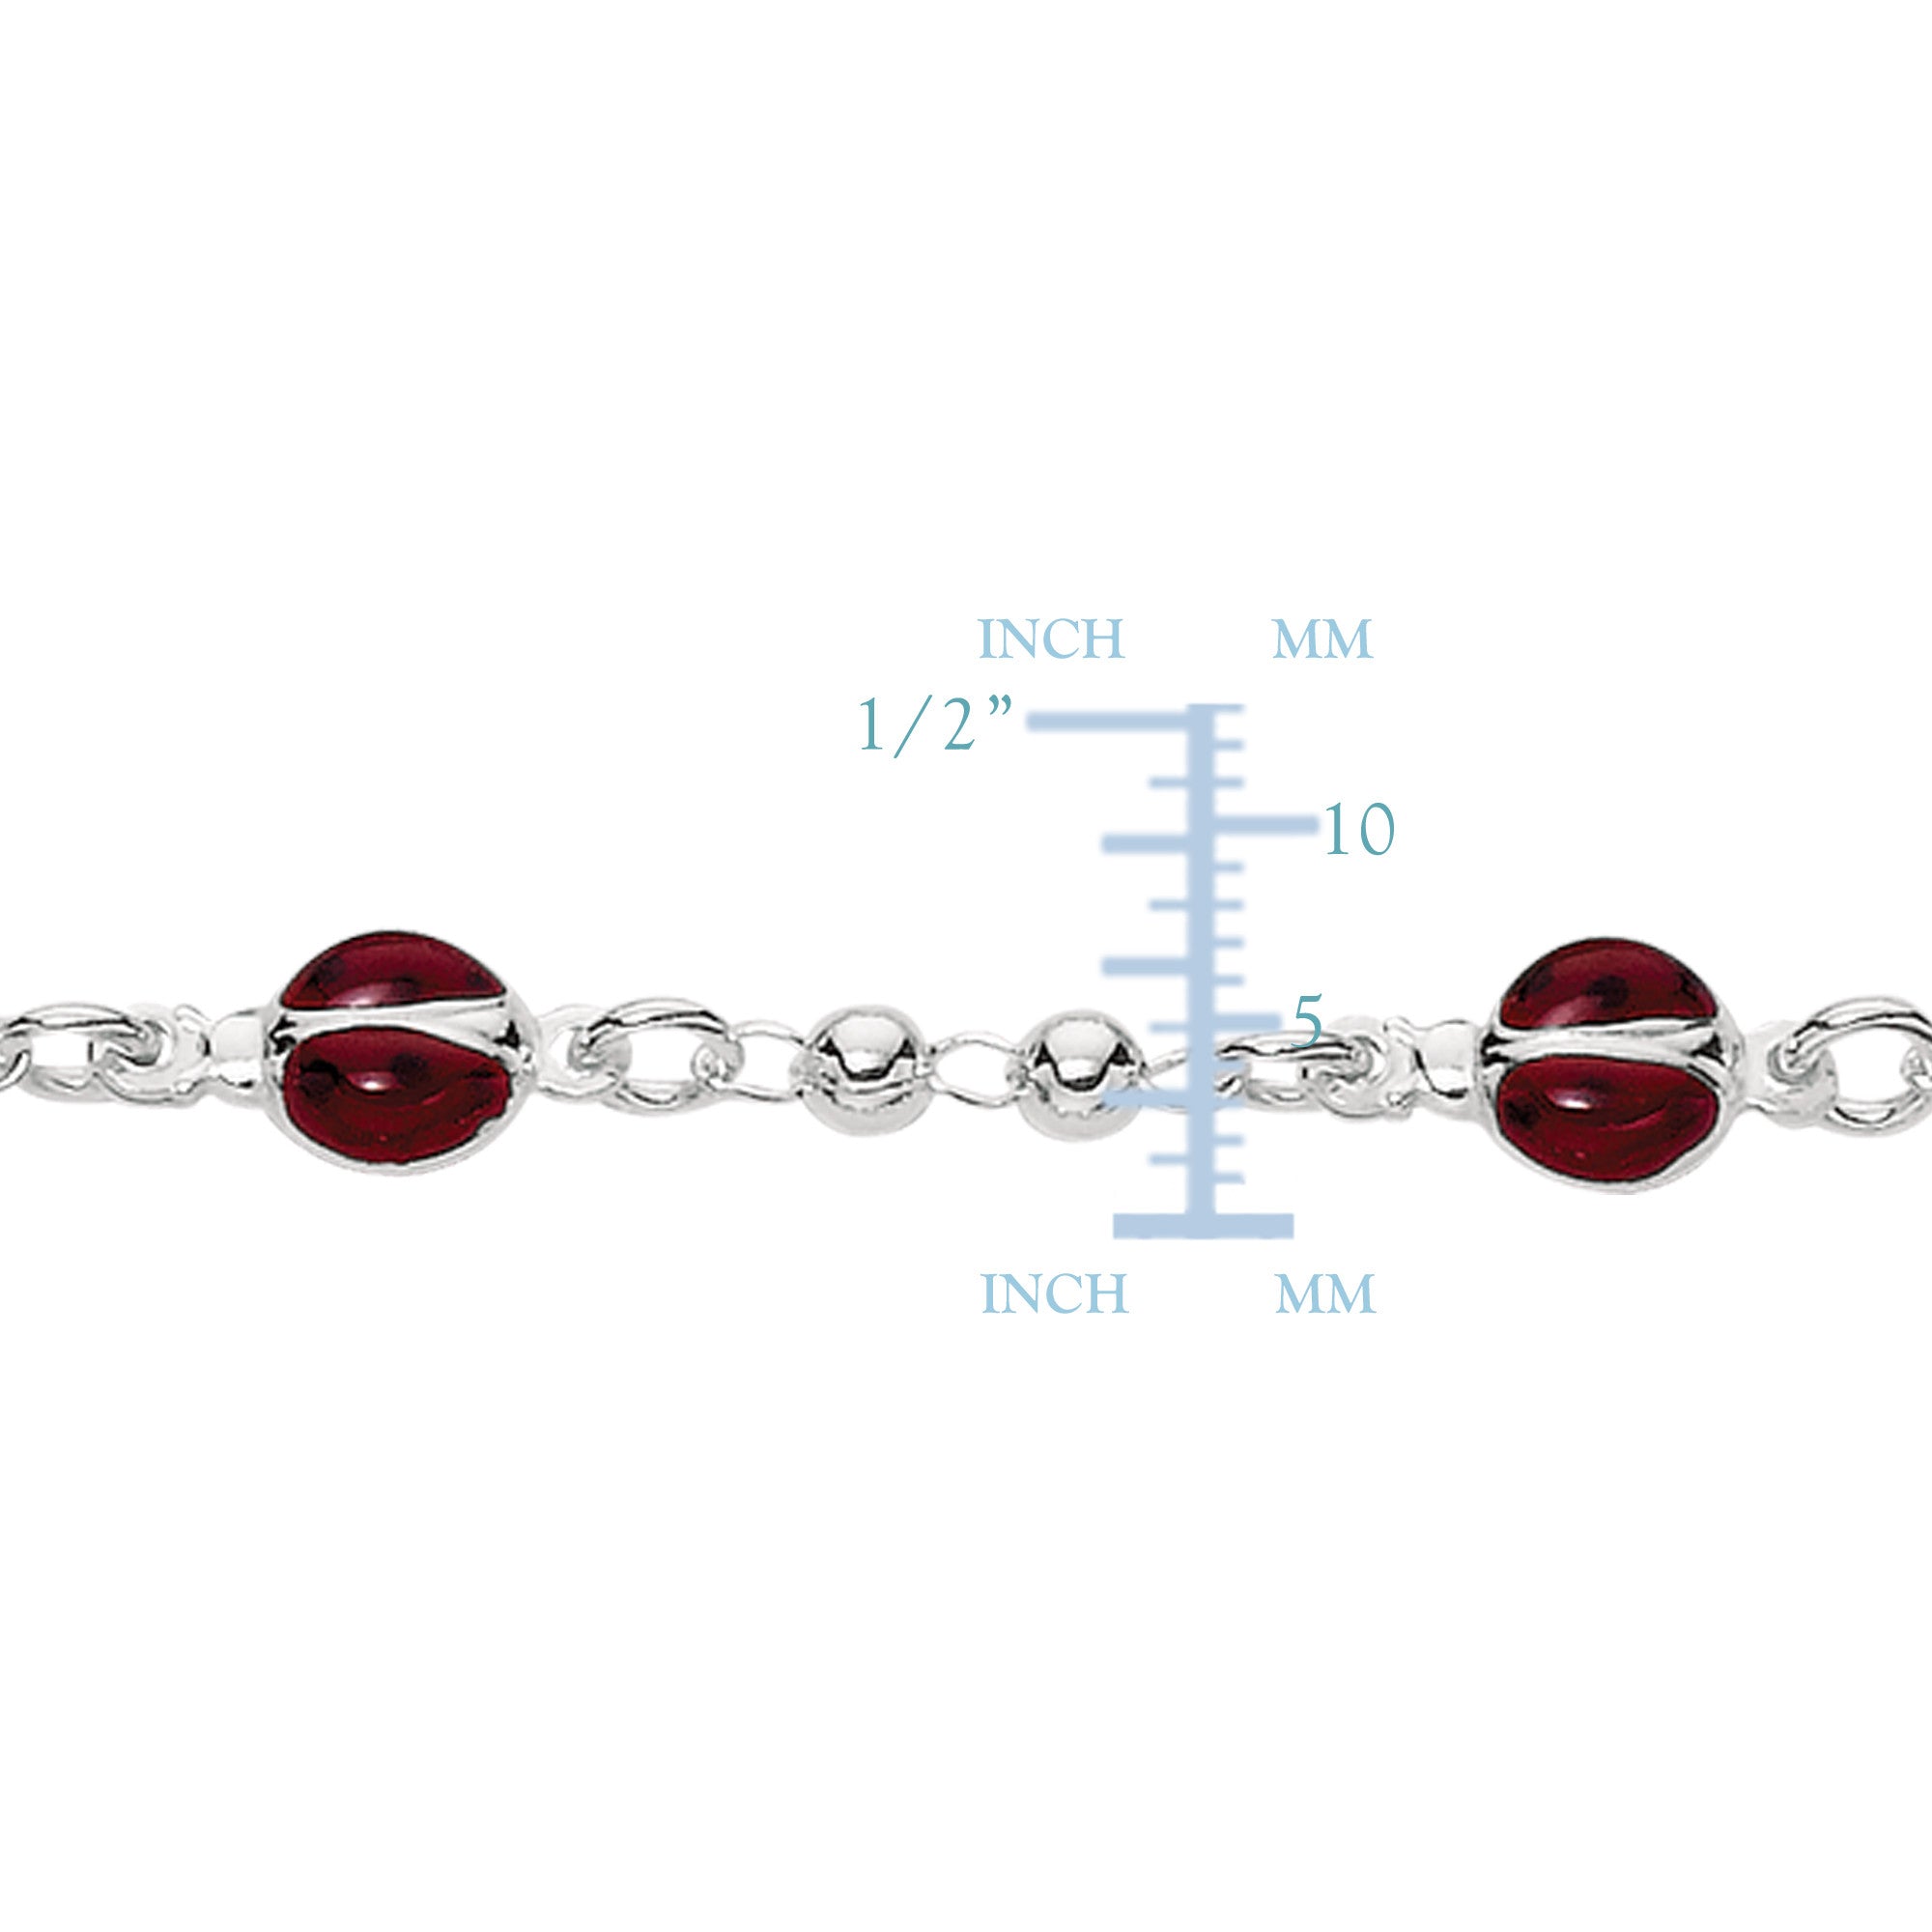 Baby Bracelet With Enameled Ladybug Charms In Sterling Silver - 6 Inches - JewelryAffairs
 - 2